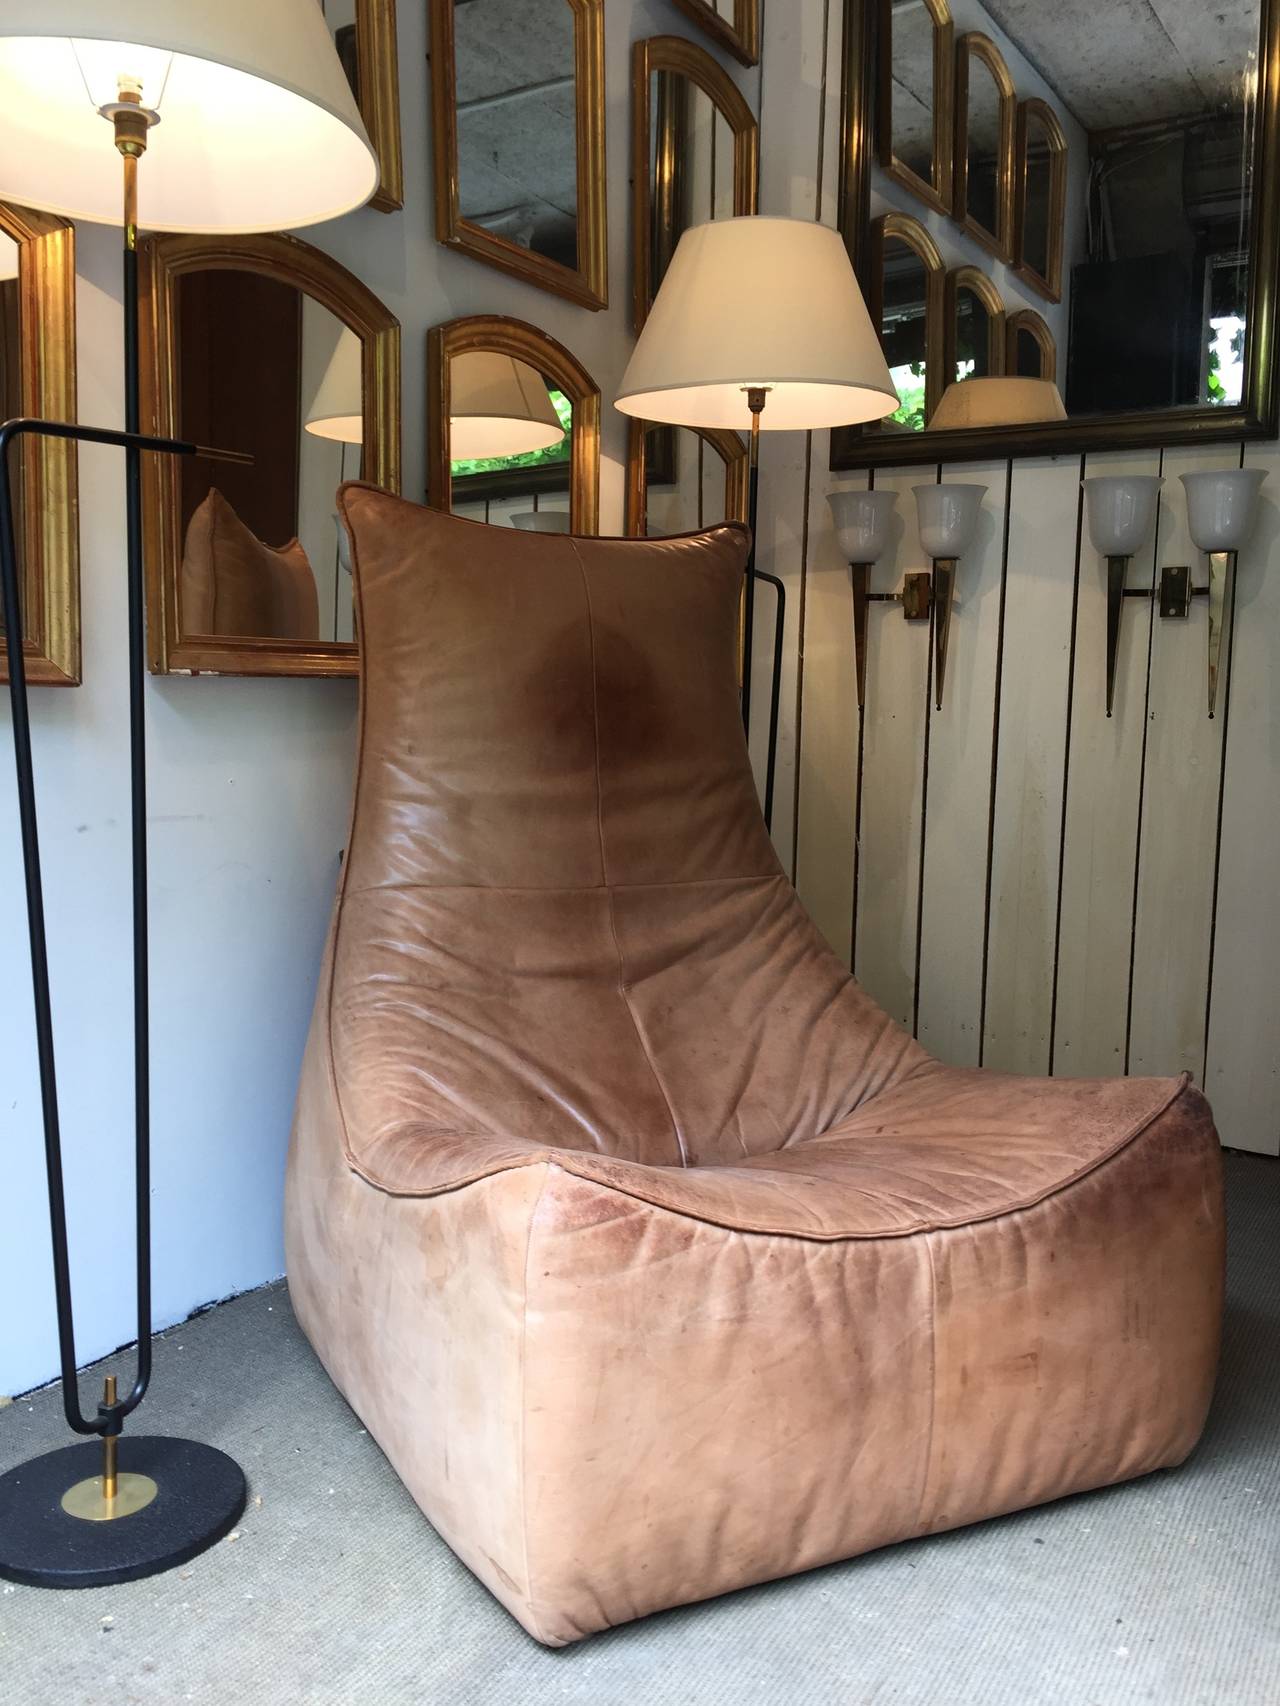 Stunning Florence (The Rock) leather easychair designed in the 70´s by Gerard van den Berg for Montis.

Dim = Hback 117 x Hseat 37 x 90 x 90 cm